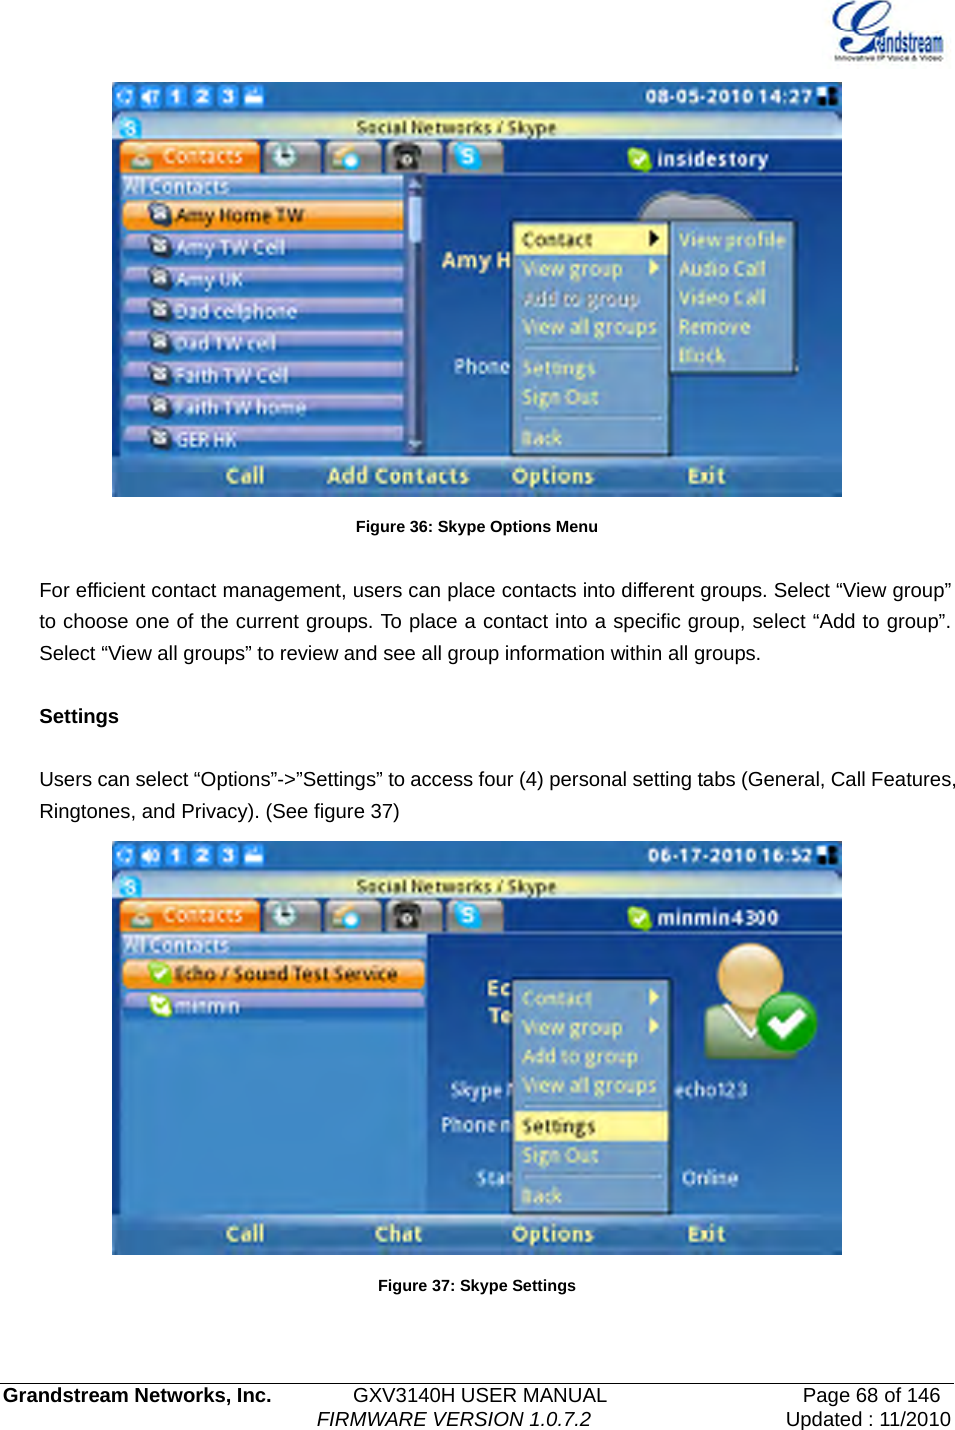   Grandstream Networks, Inc.        GXV3140H USER MANUAL                  Page 68 of 146                                FIRMWARE VERSION 1.0.7.2 Updated : 11/2010   Figure 36: Skype Options Menu  For efficient contact management, users can place contacts into different groups. Select “View group” to choose one of the current groups. To place a contact into a specific group, select “Add to group”. Select “View all groups” to review and see all group information within all groups.      Settings  Users can select “Options”-&gt;”Settings” to access four (4) personal setting tabs (General, Call Features, Ringtones, and Privacy). (See figure 37)      Figure 37: Skype Settings  